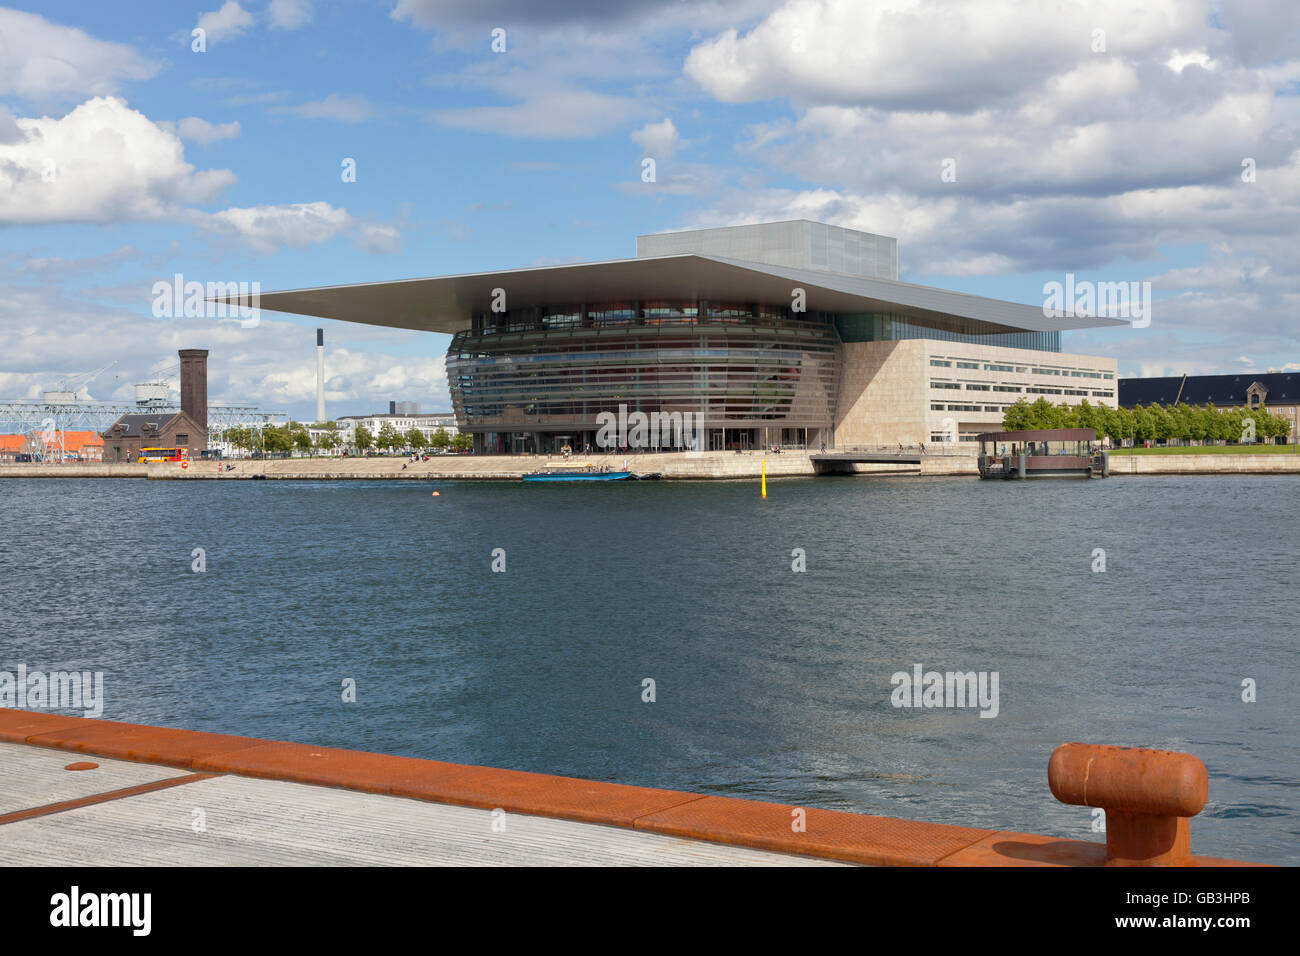 The Royal Opera House in Copenhagen seen from the quay of the new and exciting Kvaesthus Urban Space in Copenhagen Harbour. Donated by A.P. Møller. Stock Photo